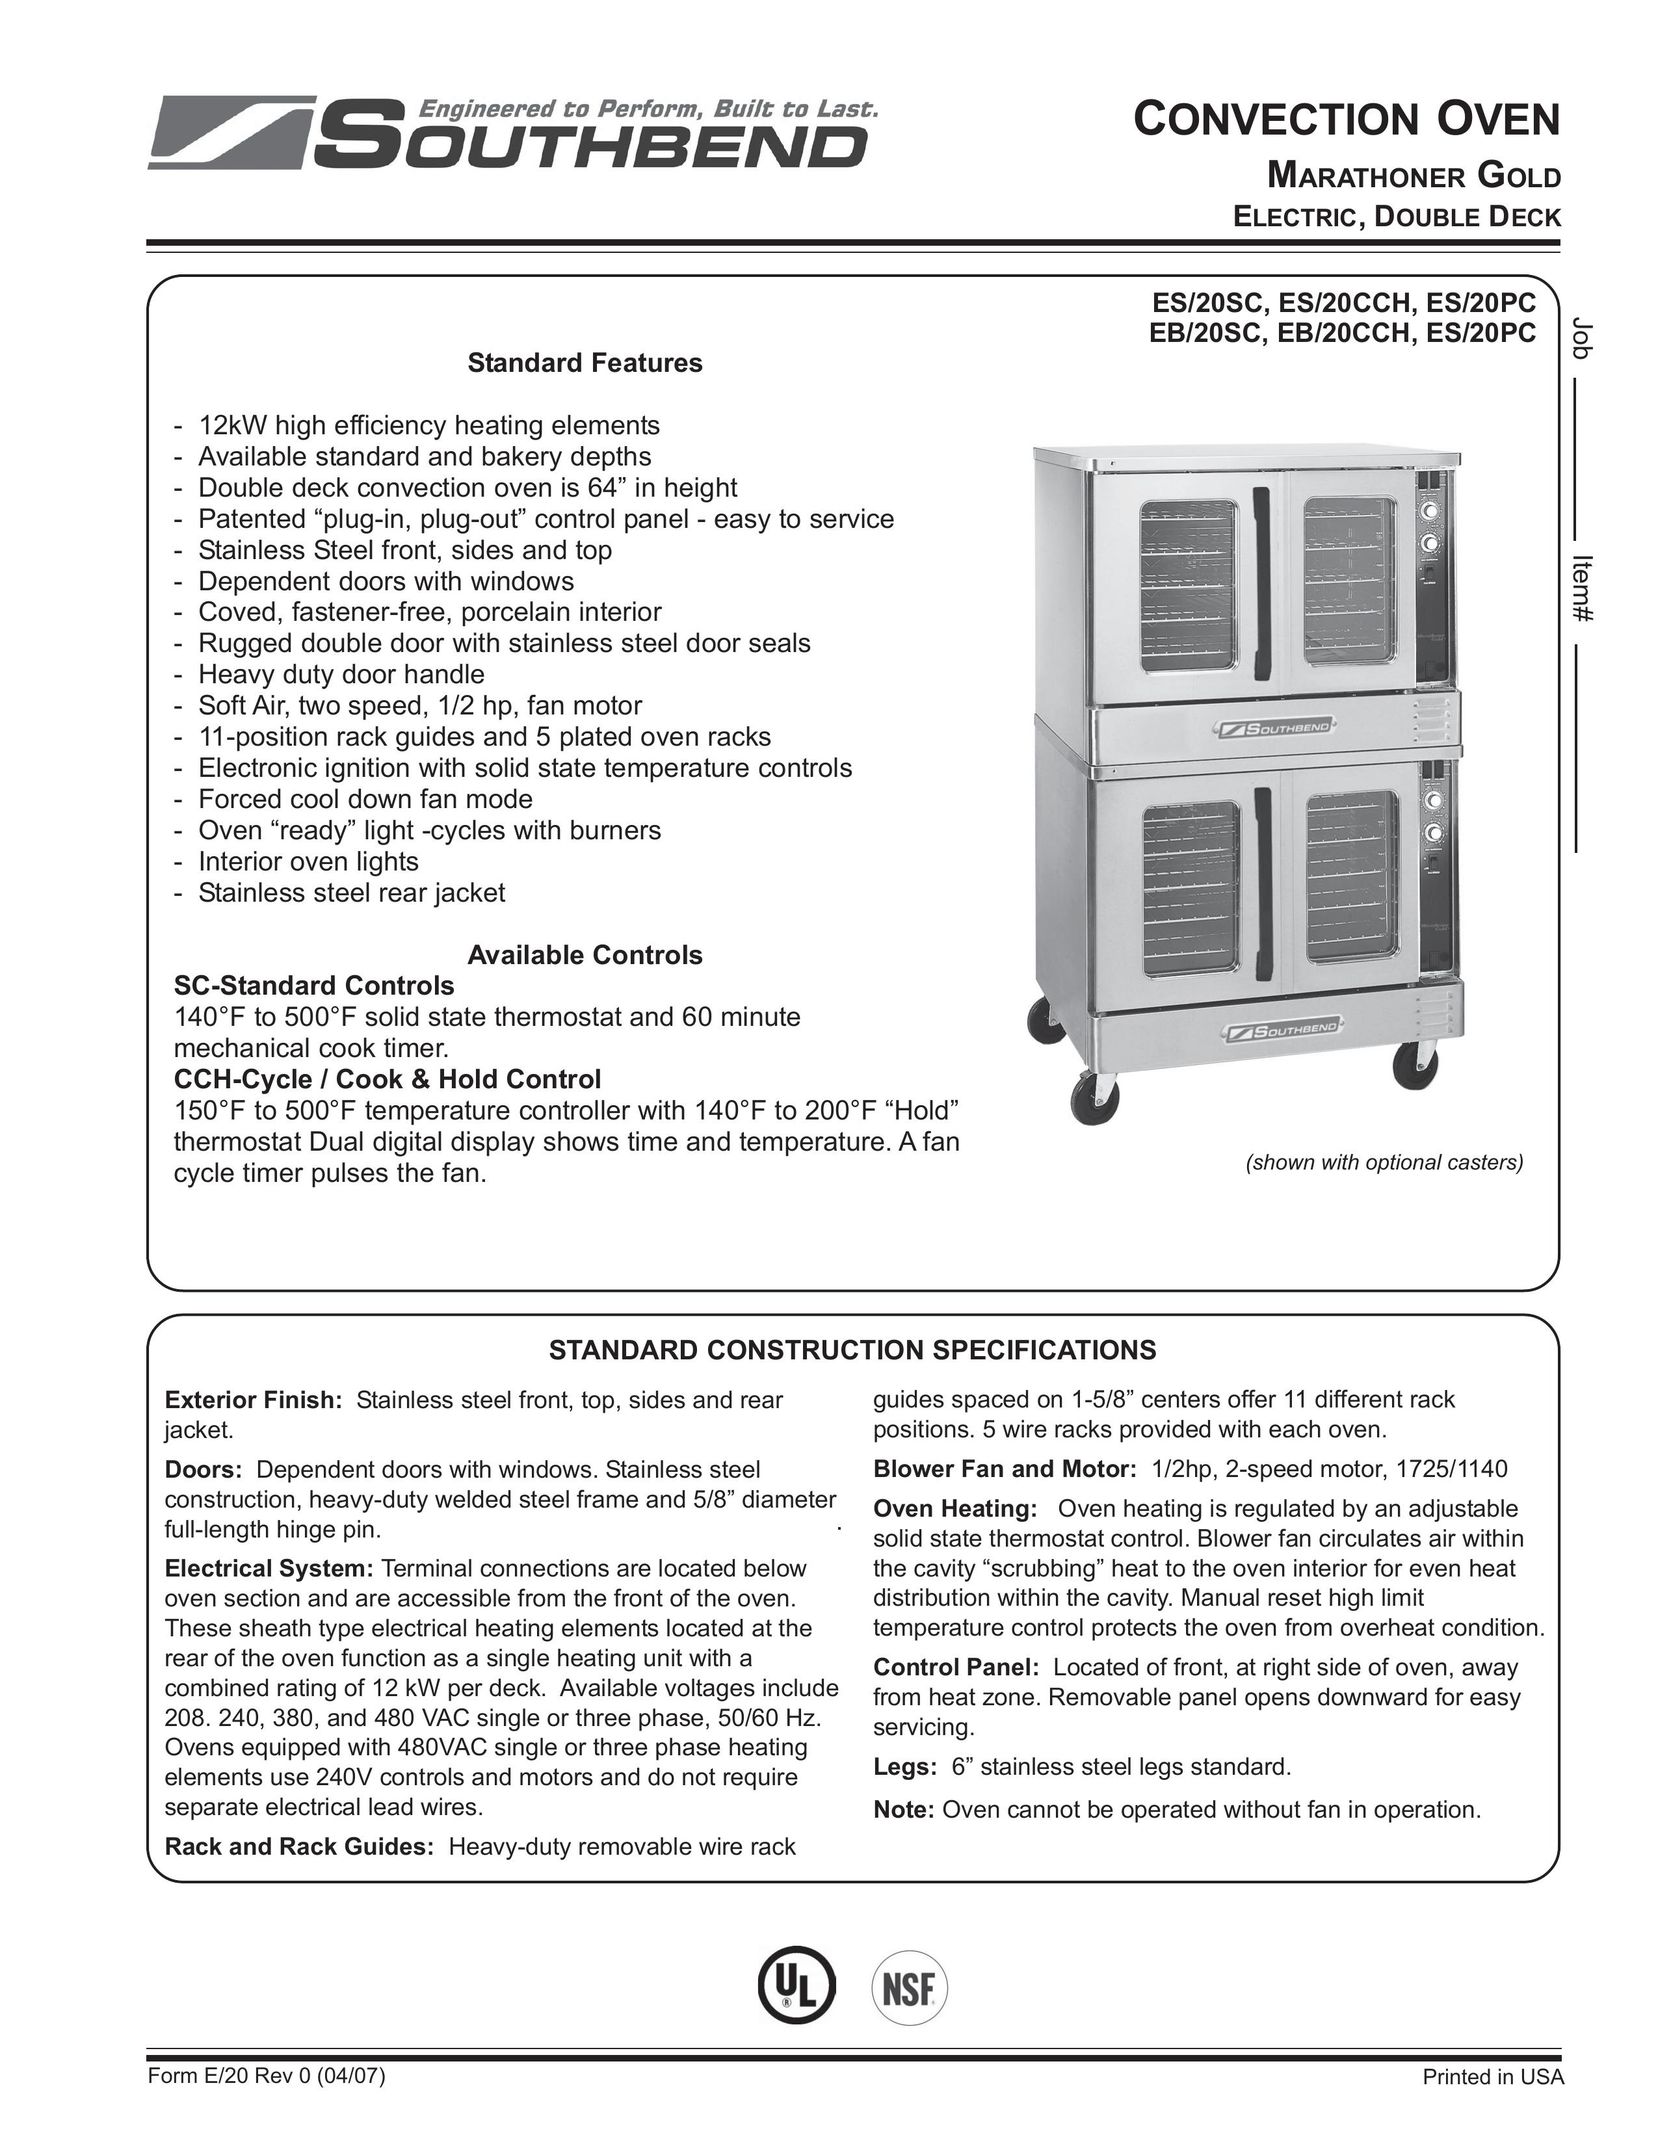 Southbend ES/20SC Convection Oven User Manual